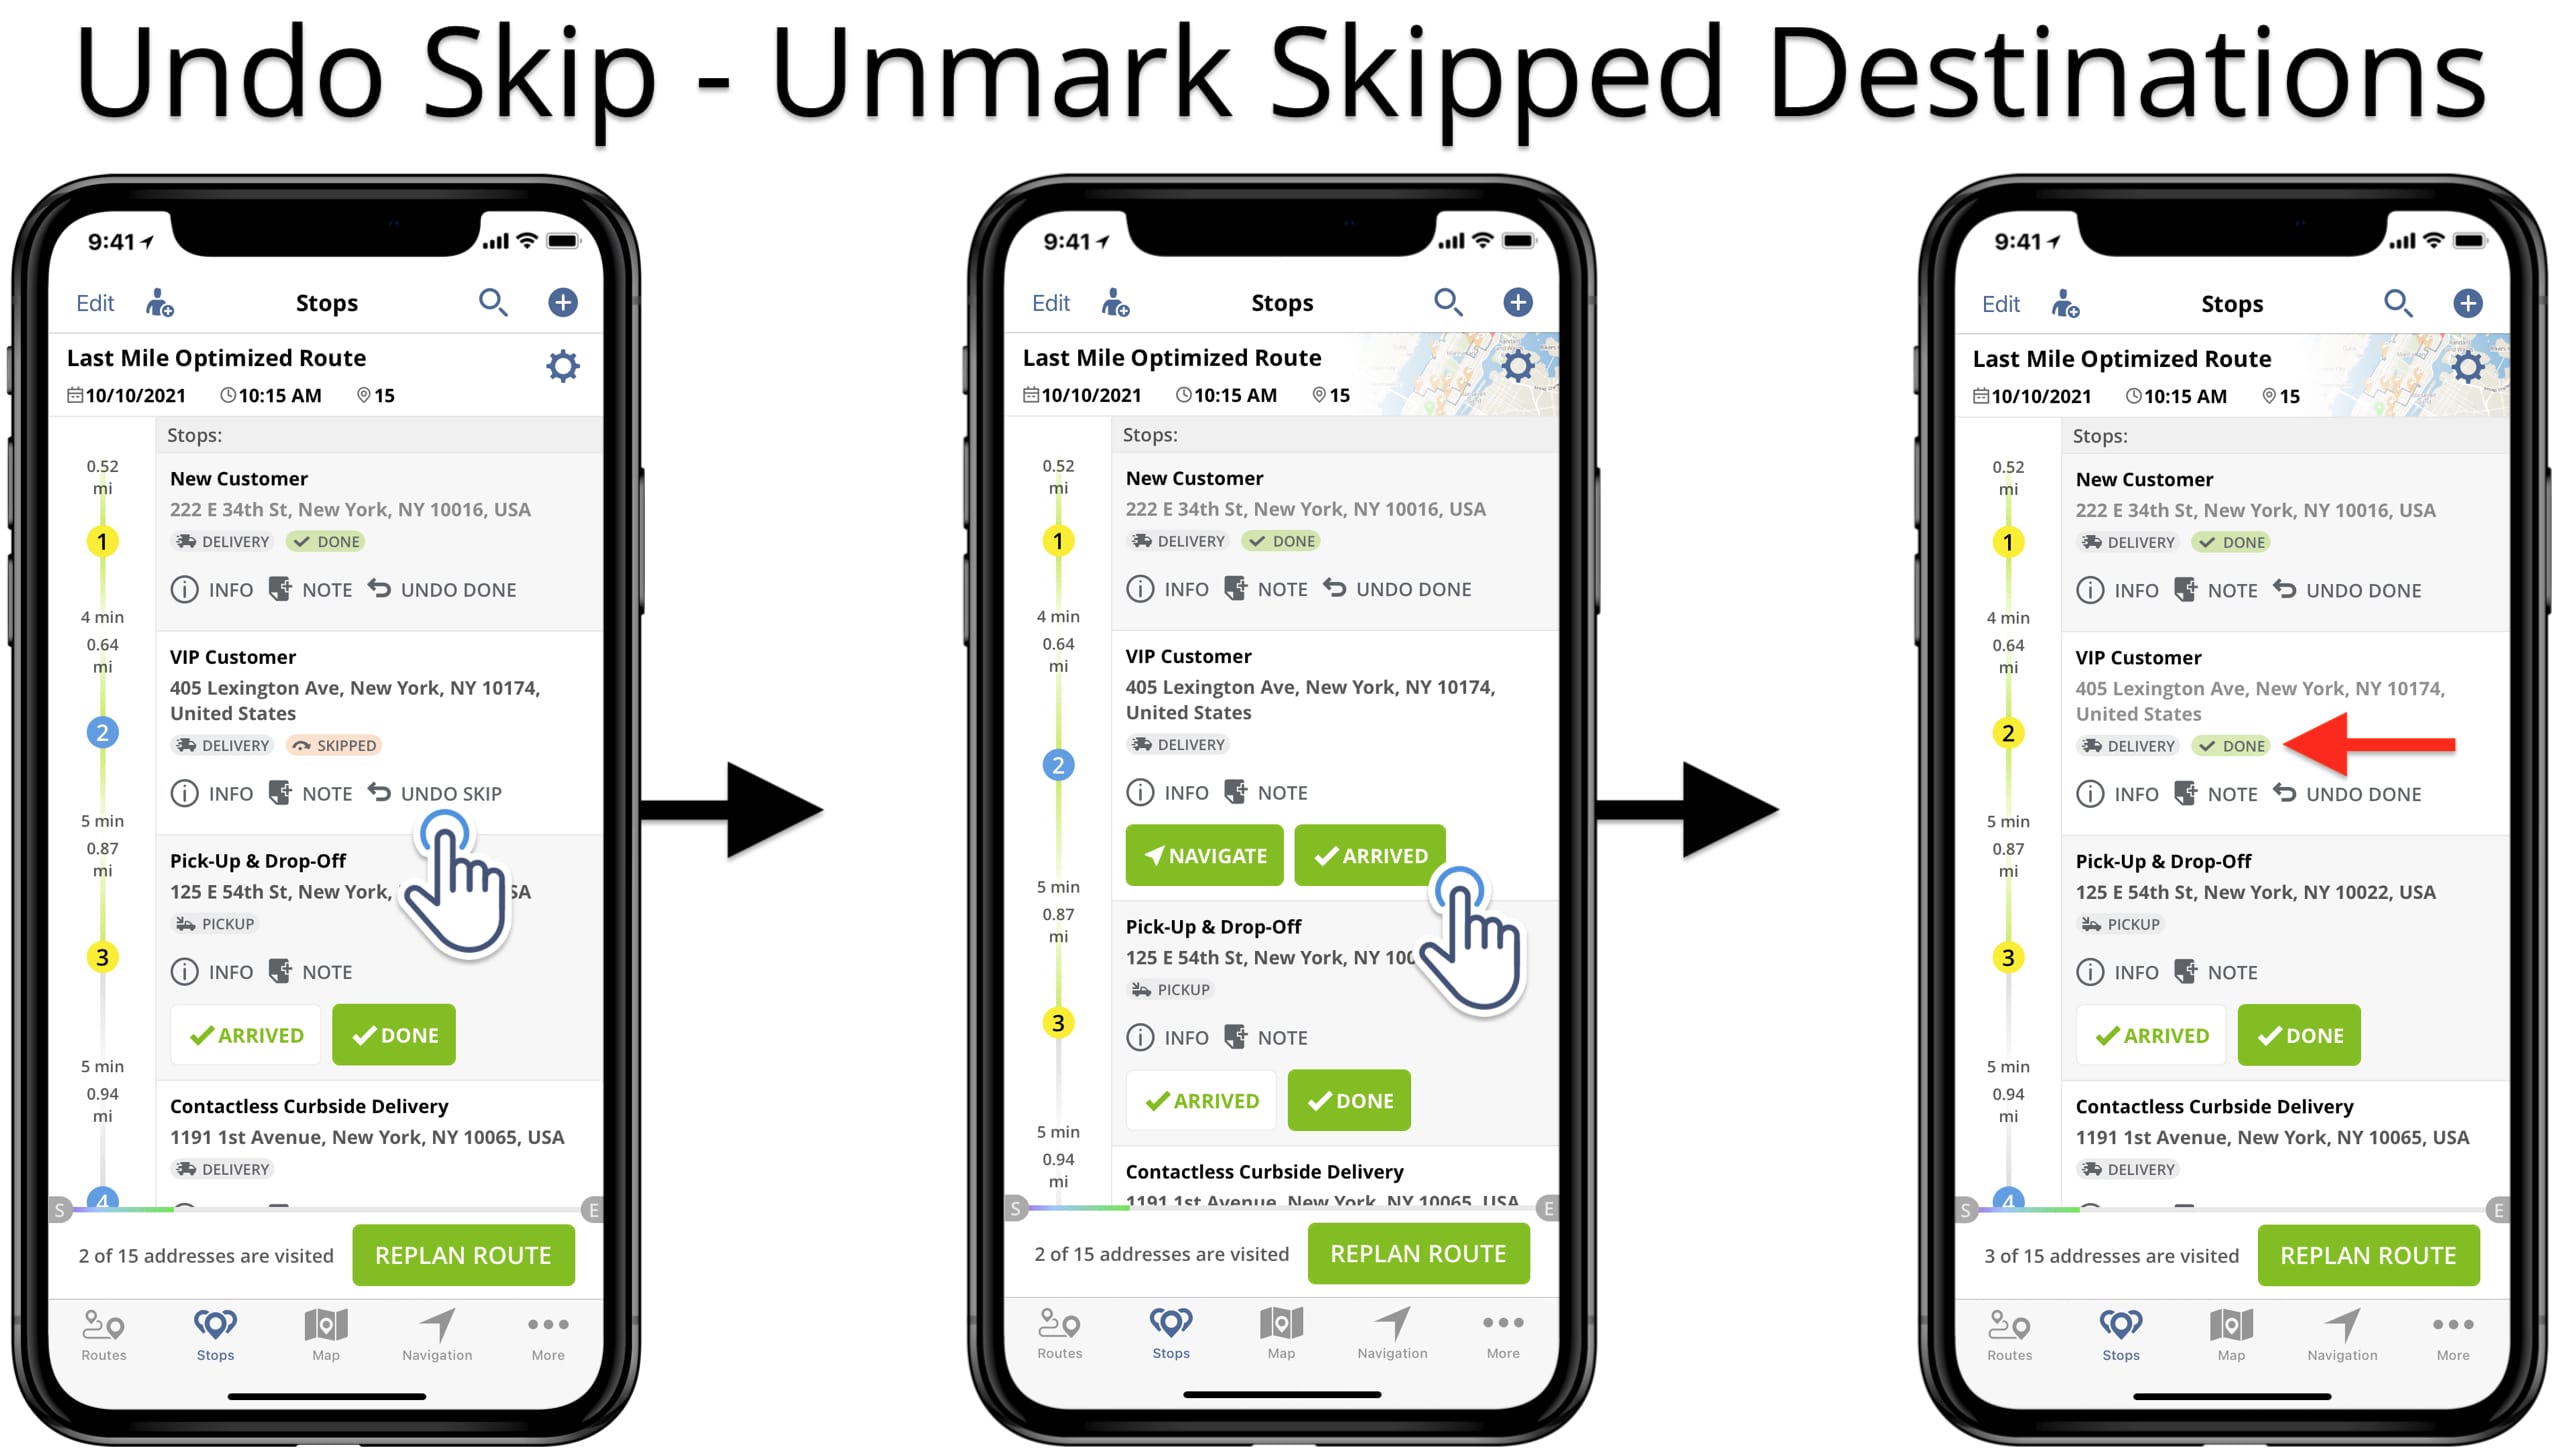 Undo Skip to unmark skipped route stops and resume route navigation.